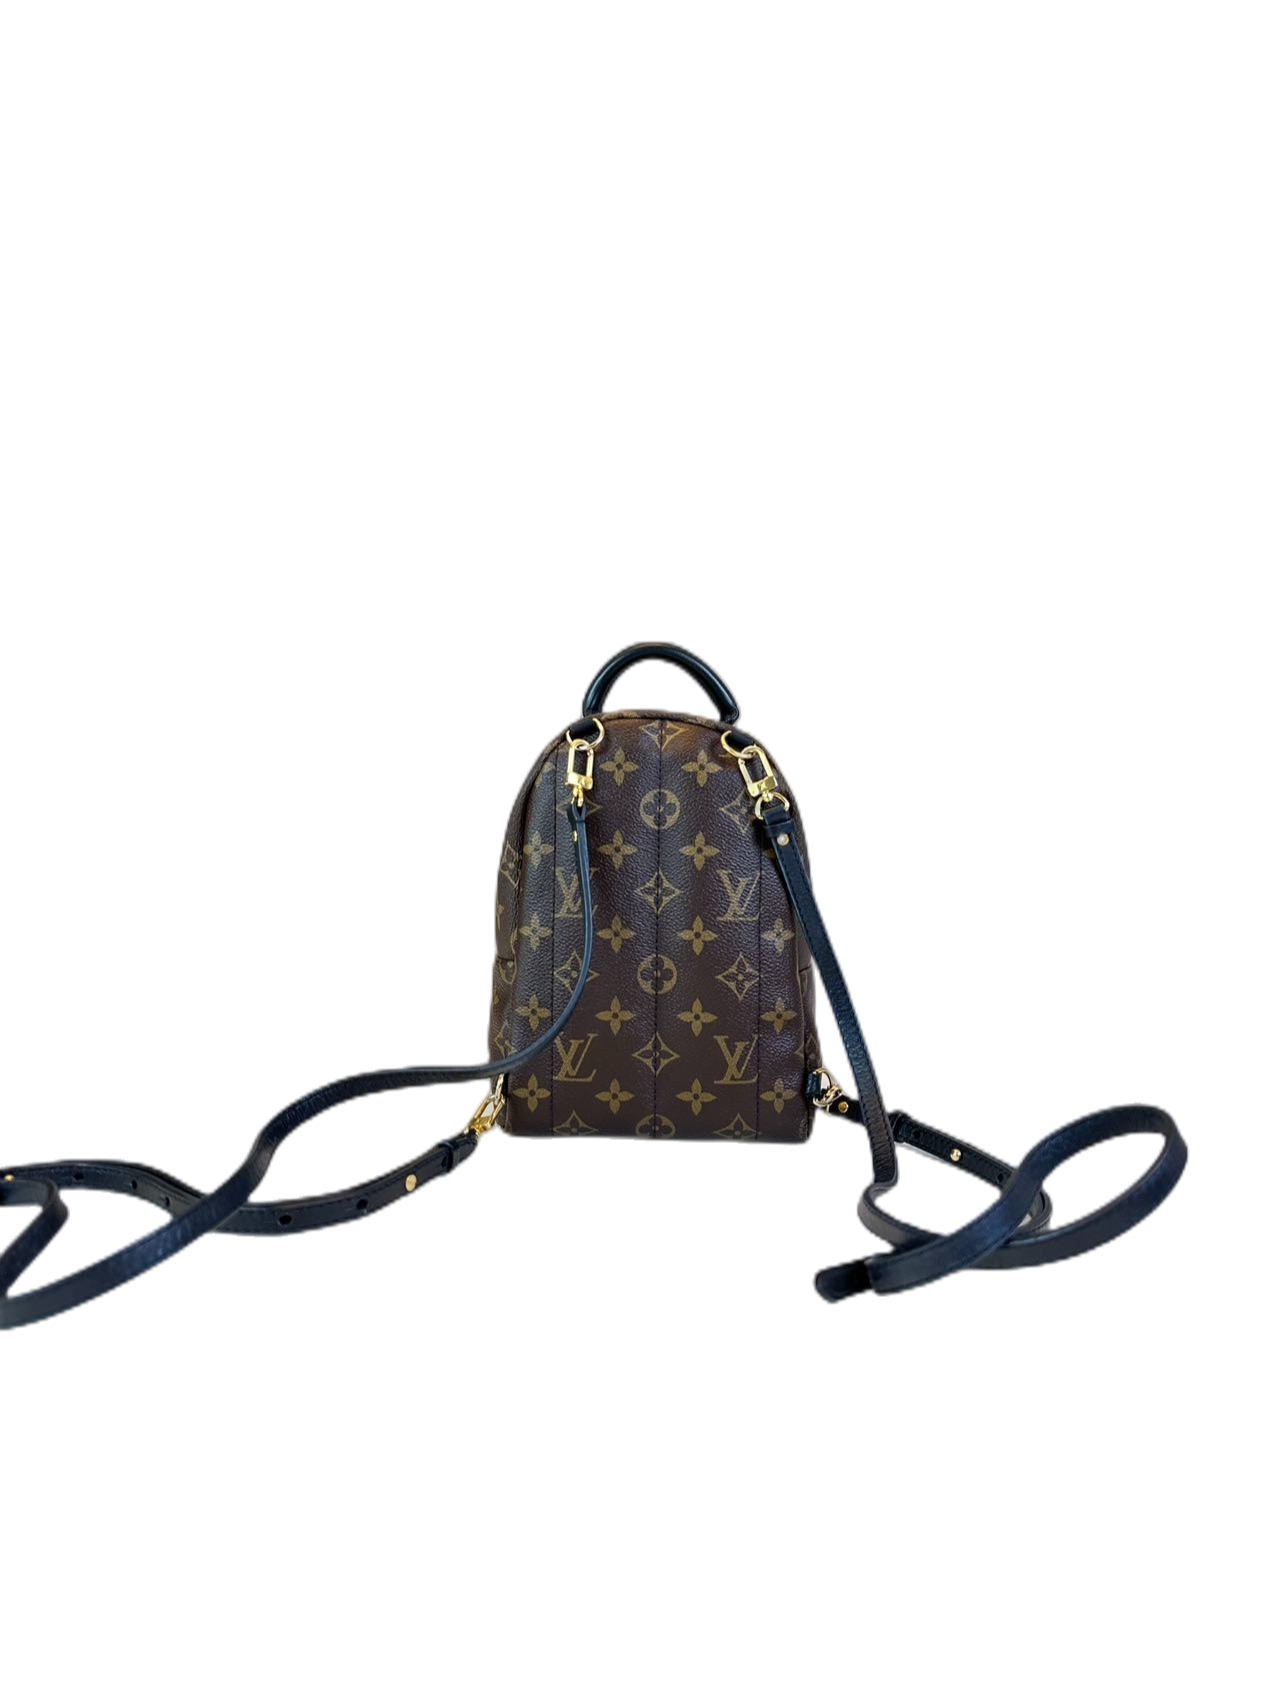 Preloved Louis Vuitton Monogram Canvas Mini Palm Spring Backpack